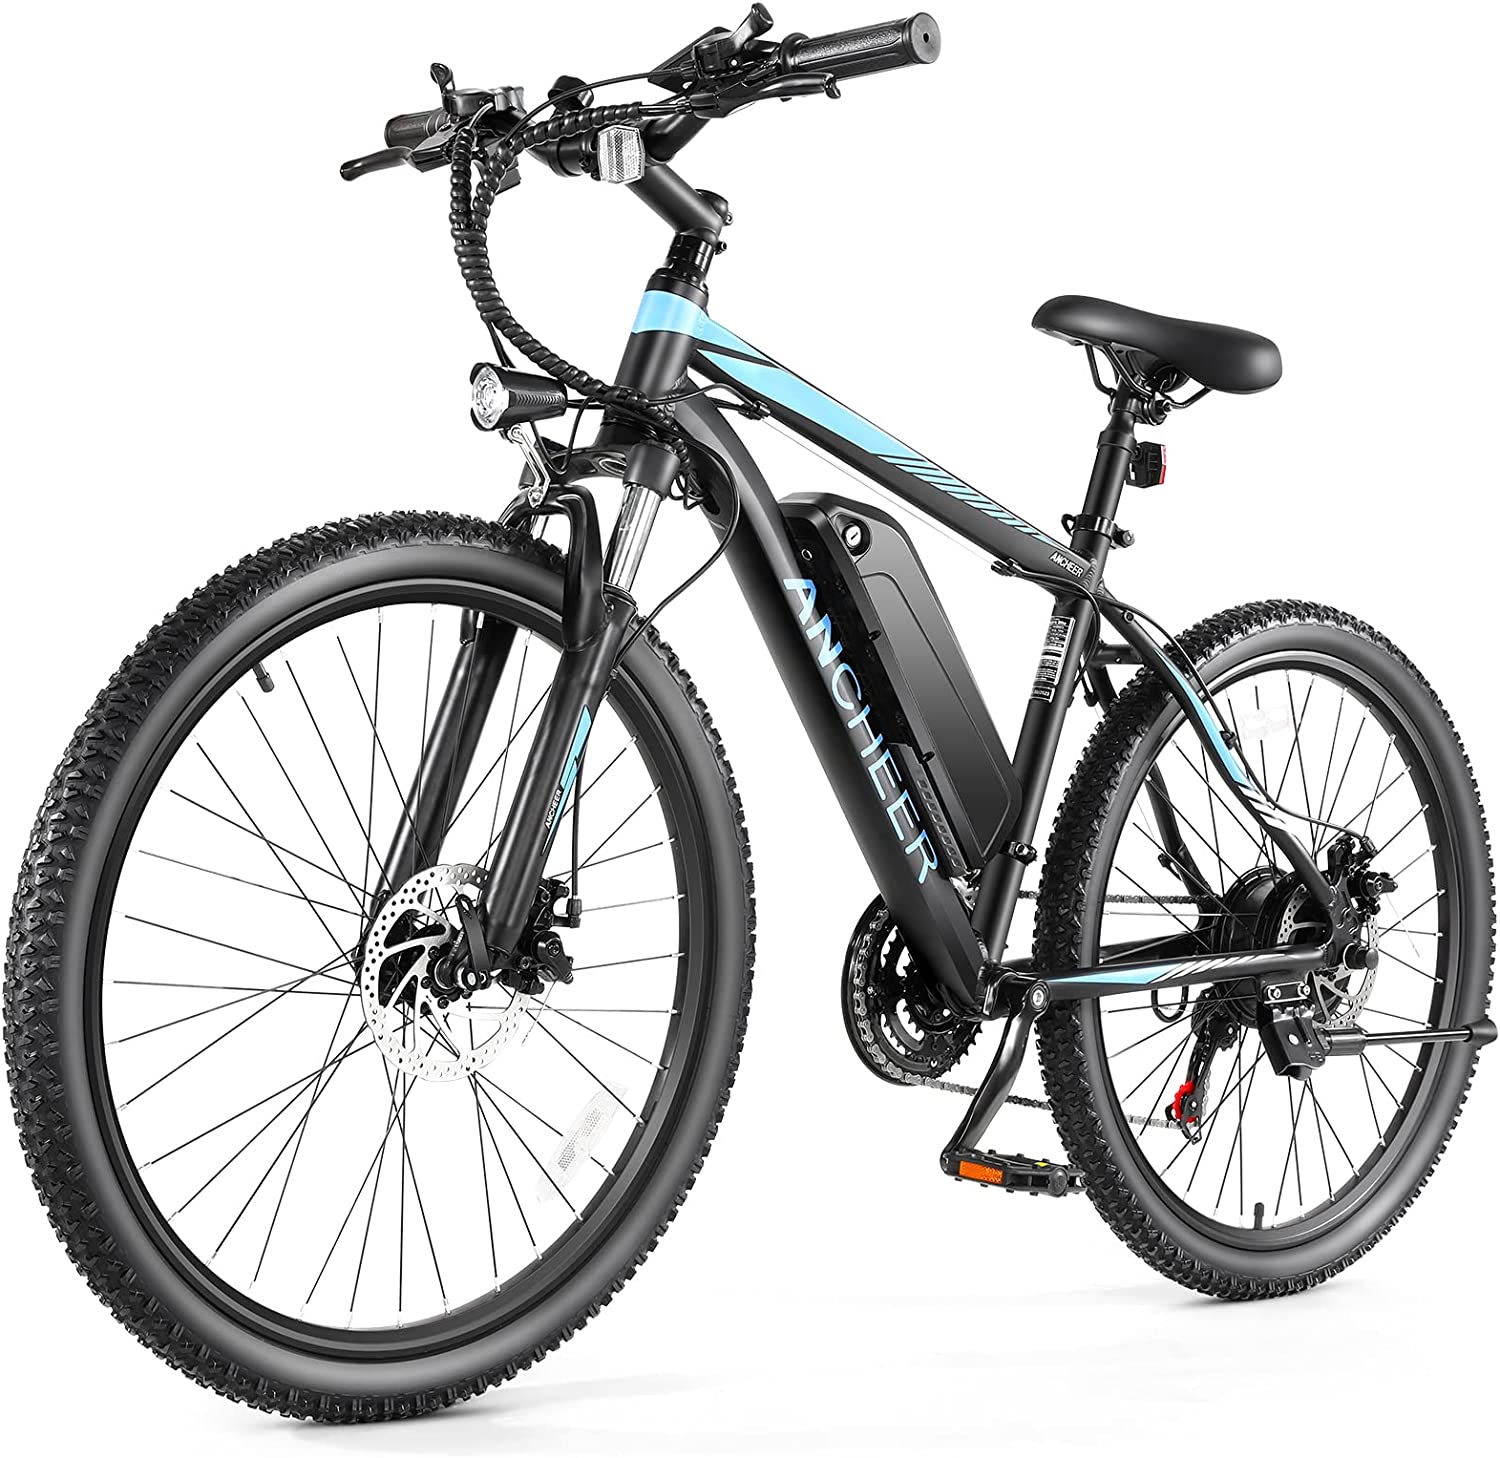 Electric Ride Nerd - "Gear Up and Go: Revolutionary 5 Must-Have E-Bike Accessories for Adventure and Supercharge Your E-Bike Adventure"